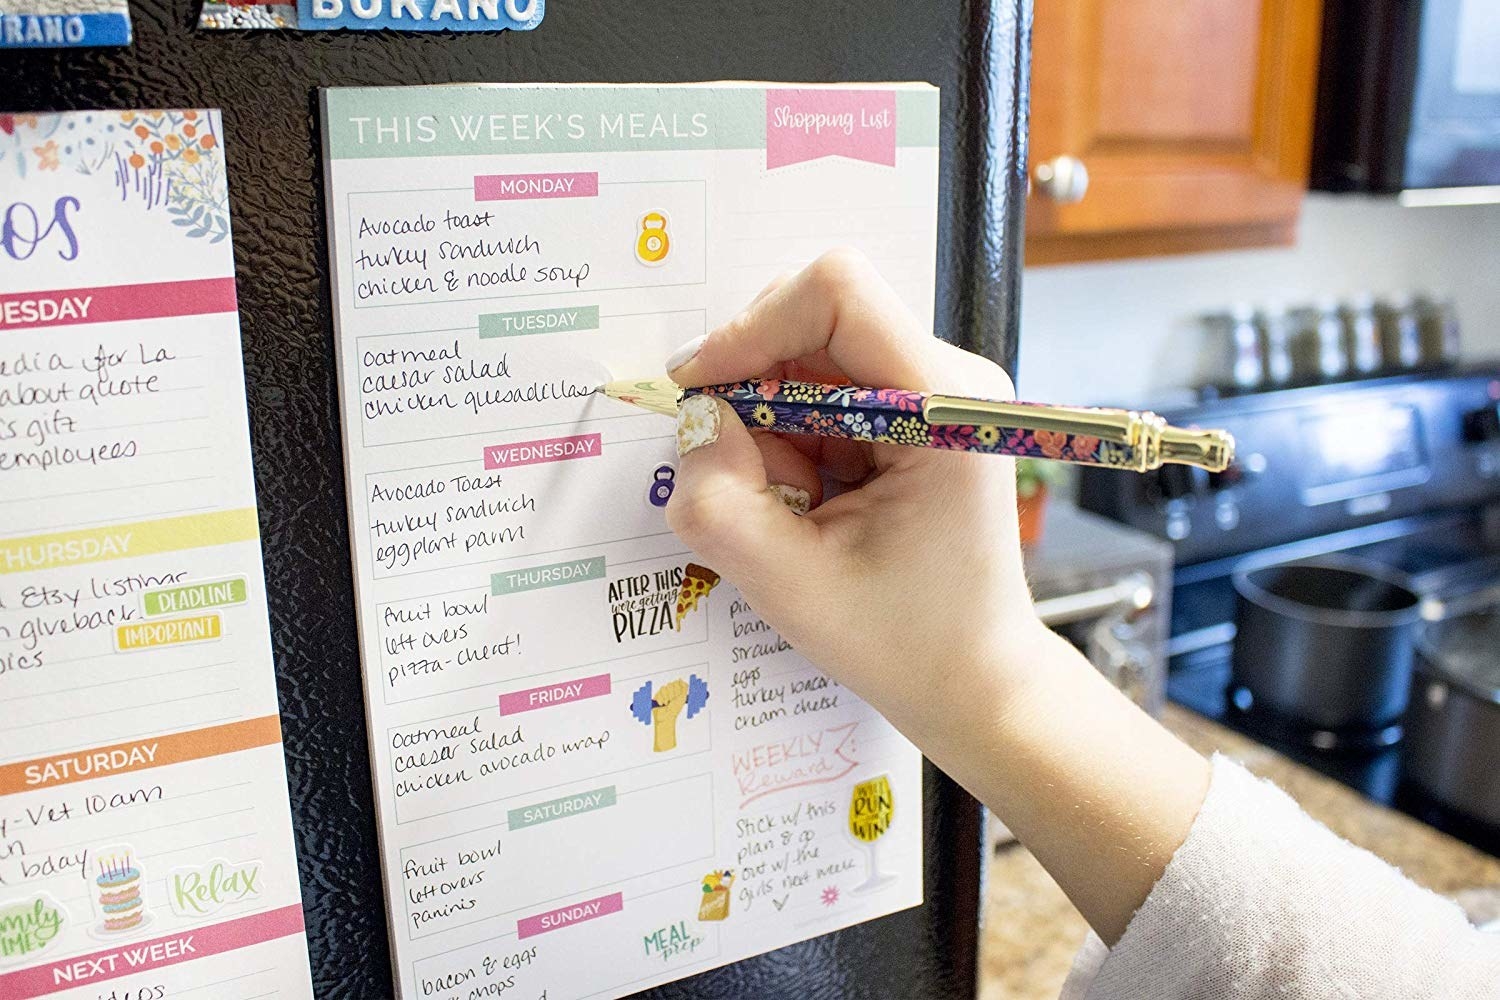 A model writing on the pad, which is on the refrigerator. The pad has spaces for every day of the week and a column for a shopping list